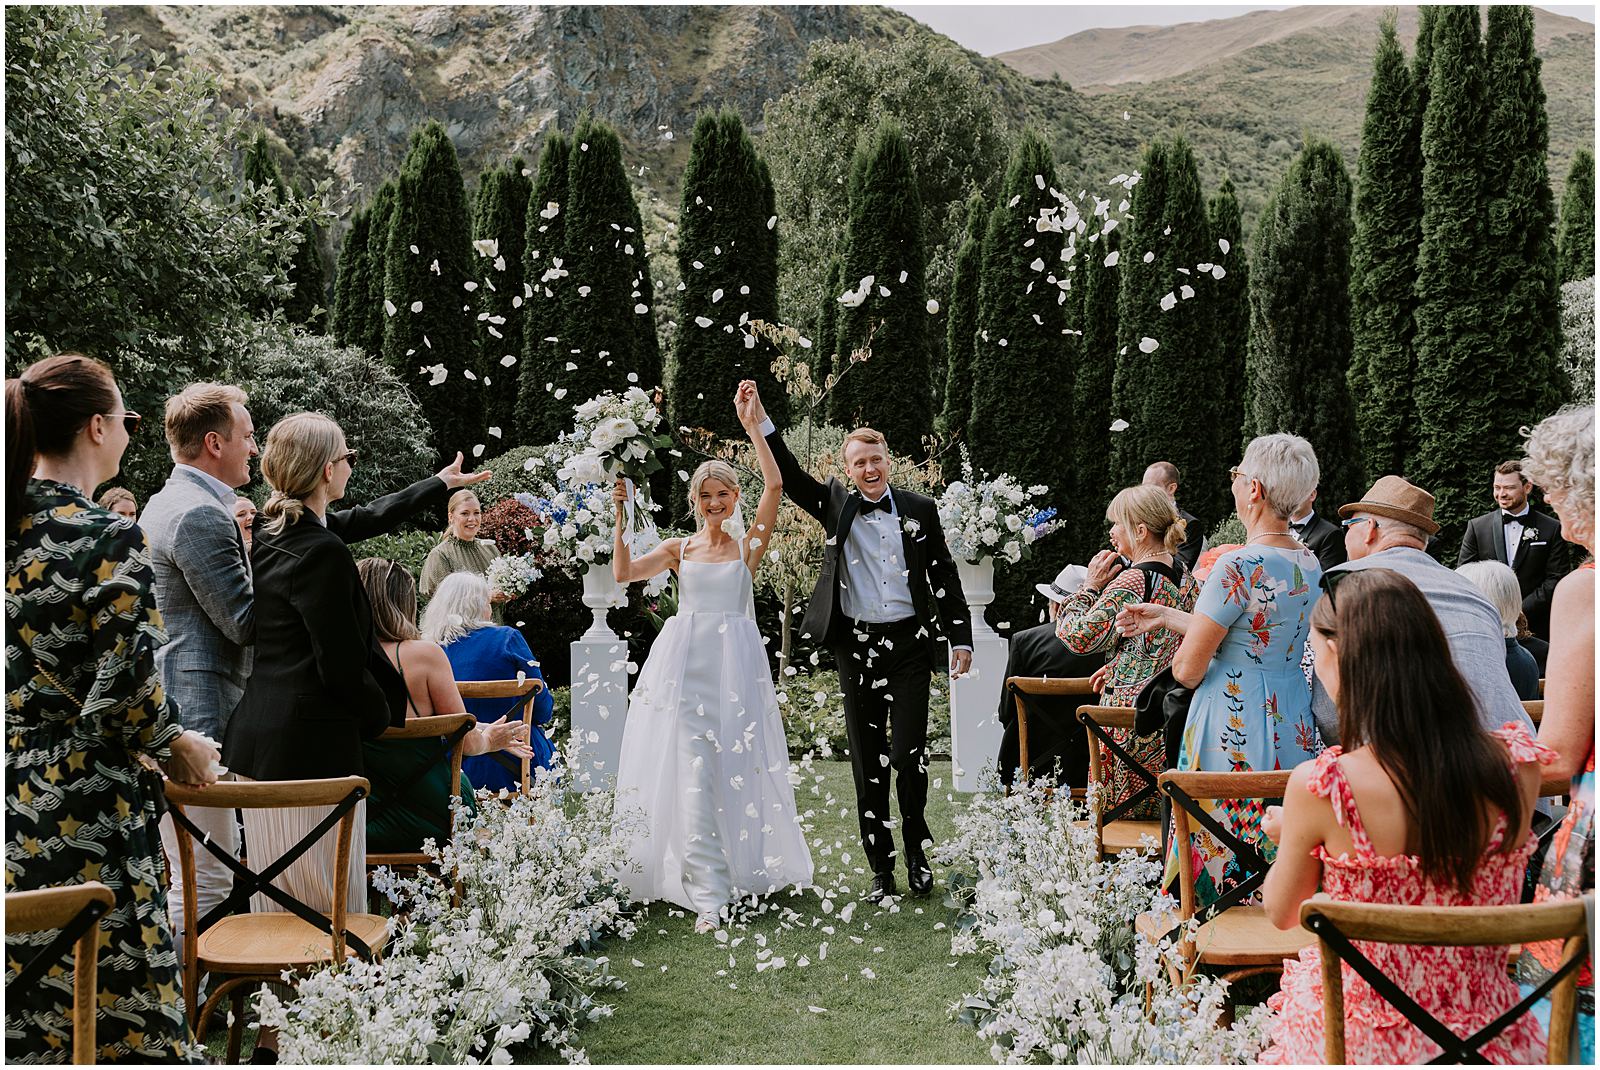 Charlotte Kiri Photography - Wedding Photography of a bride and groom walking down the aisle and raising their hands in the air together with joy, as they celebrate with their wedding guests who are throwing white petals around them, with a backdrop of poplar trees and mountains in Wanaka, New Zealand.